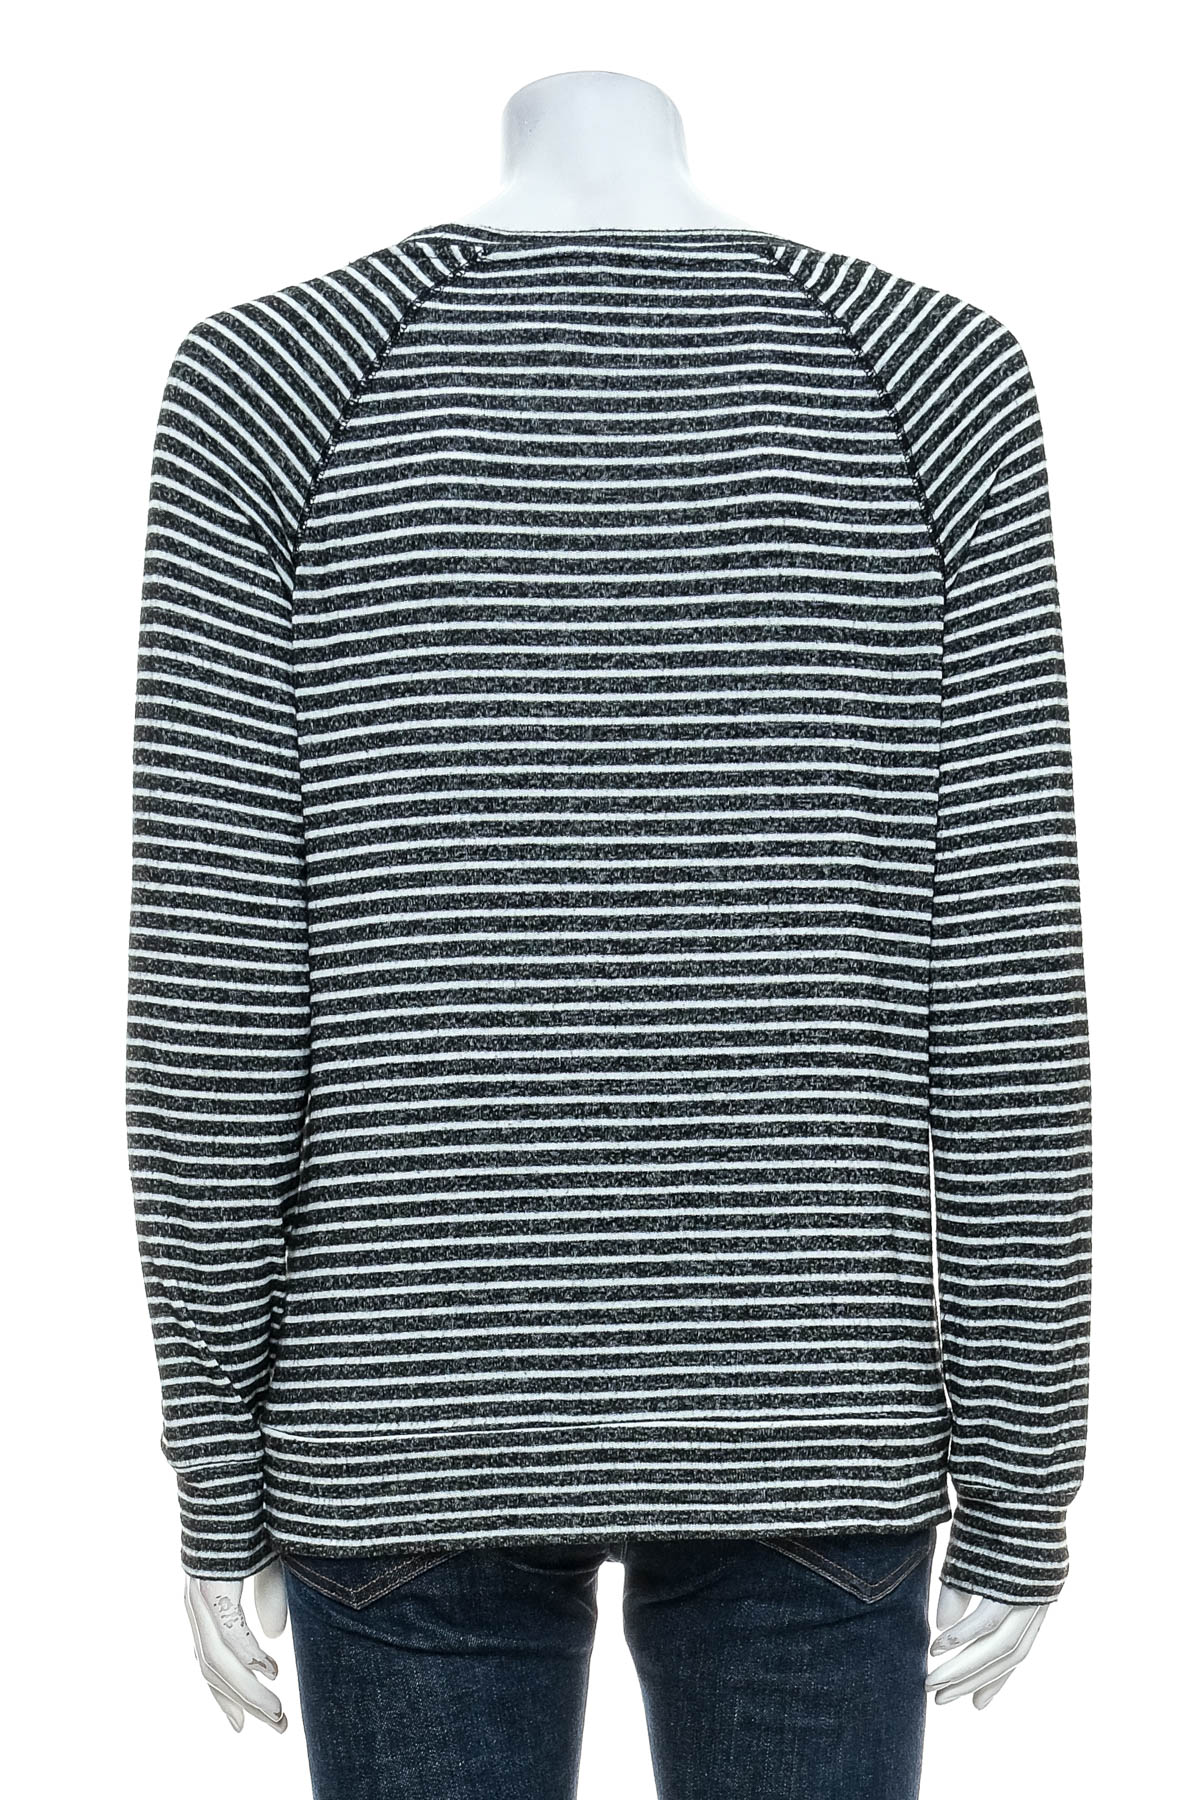 Women's sweater - Mix By 41Hawthorn - 1